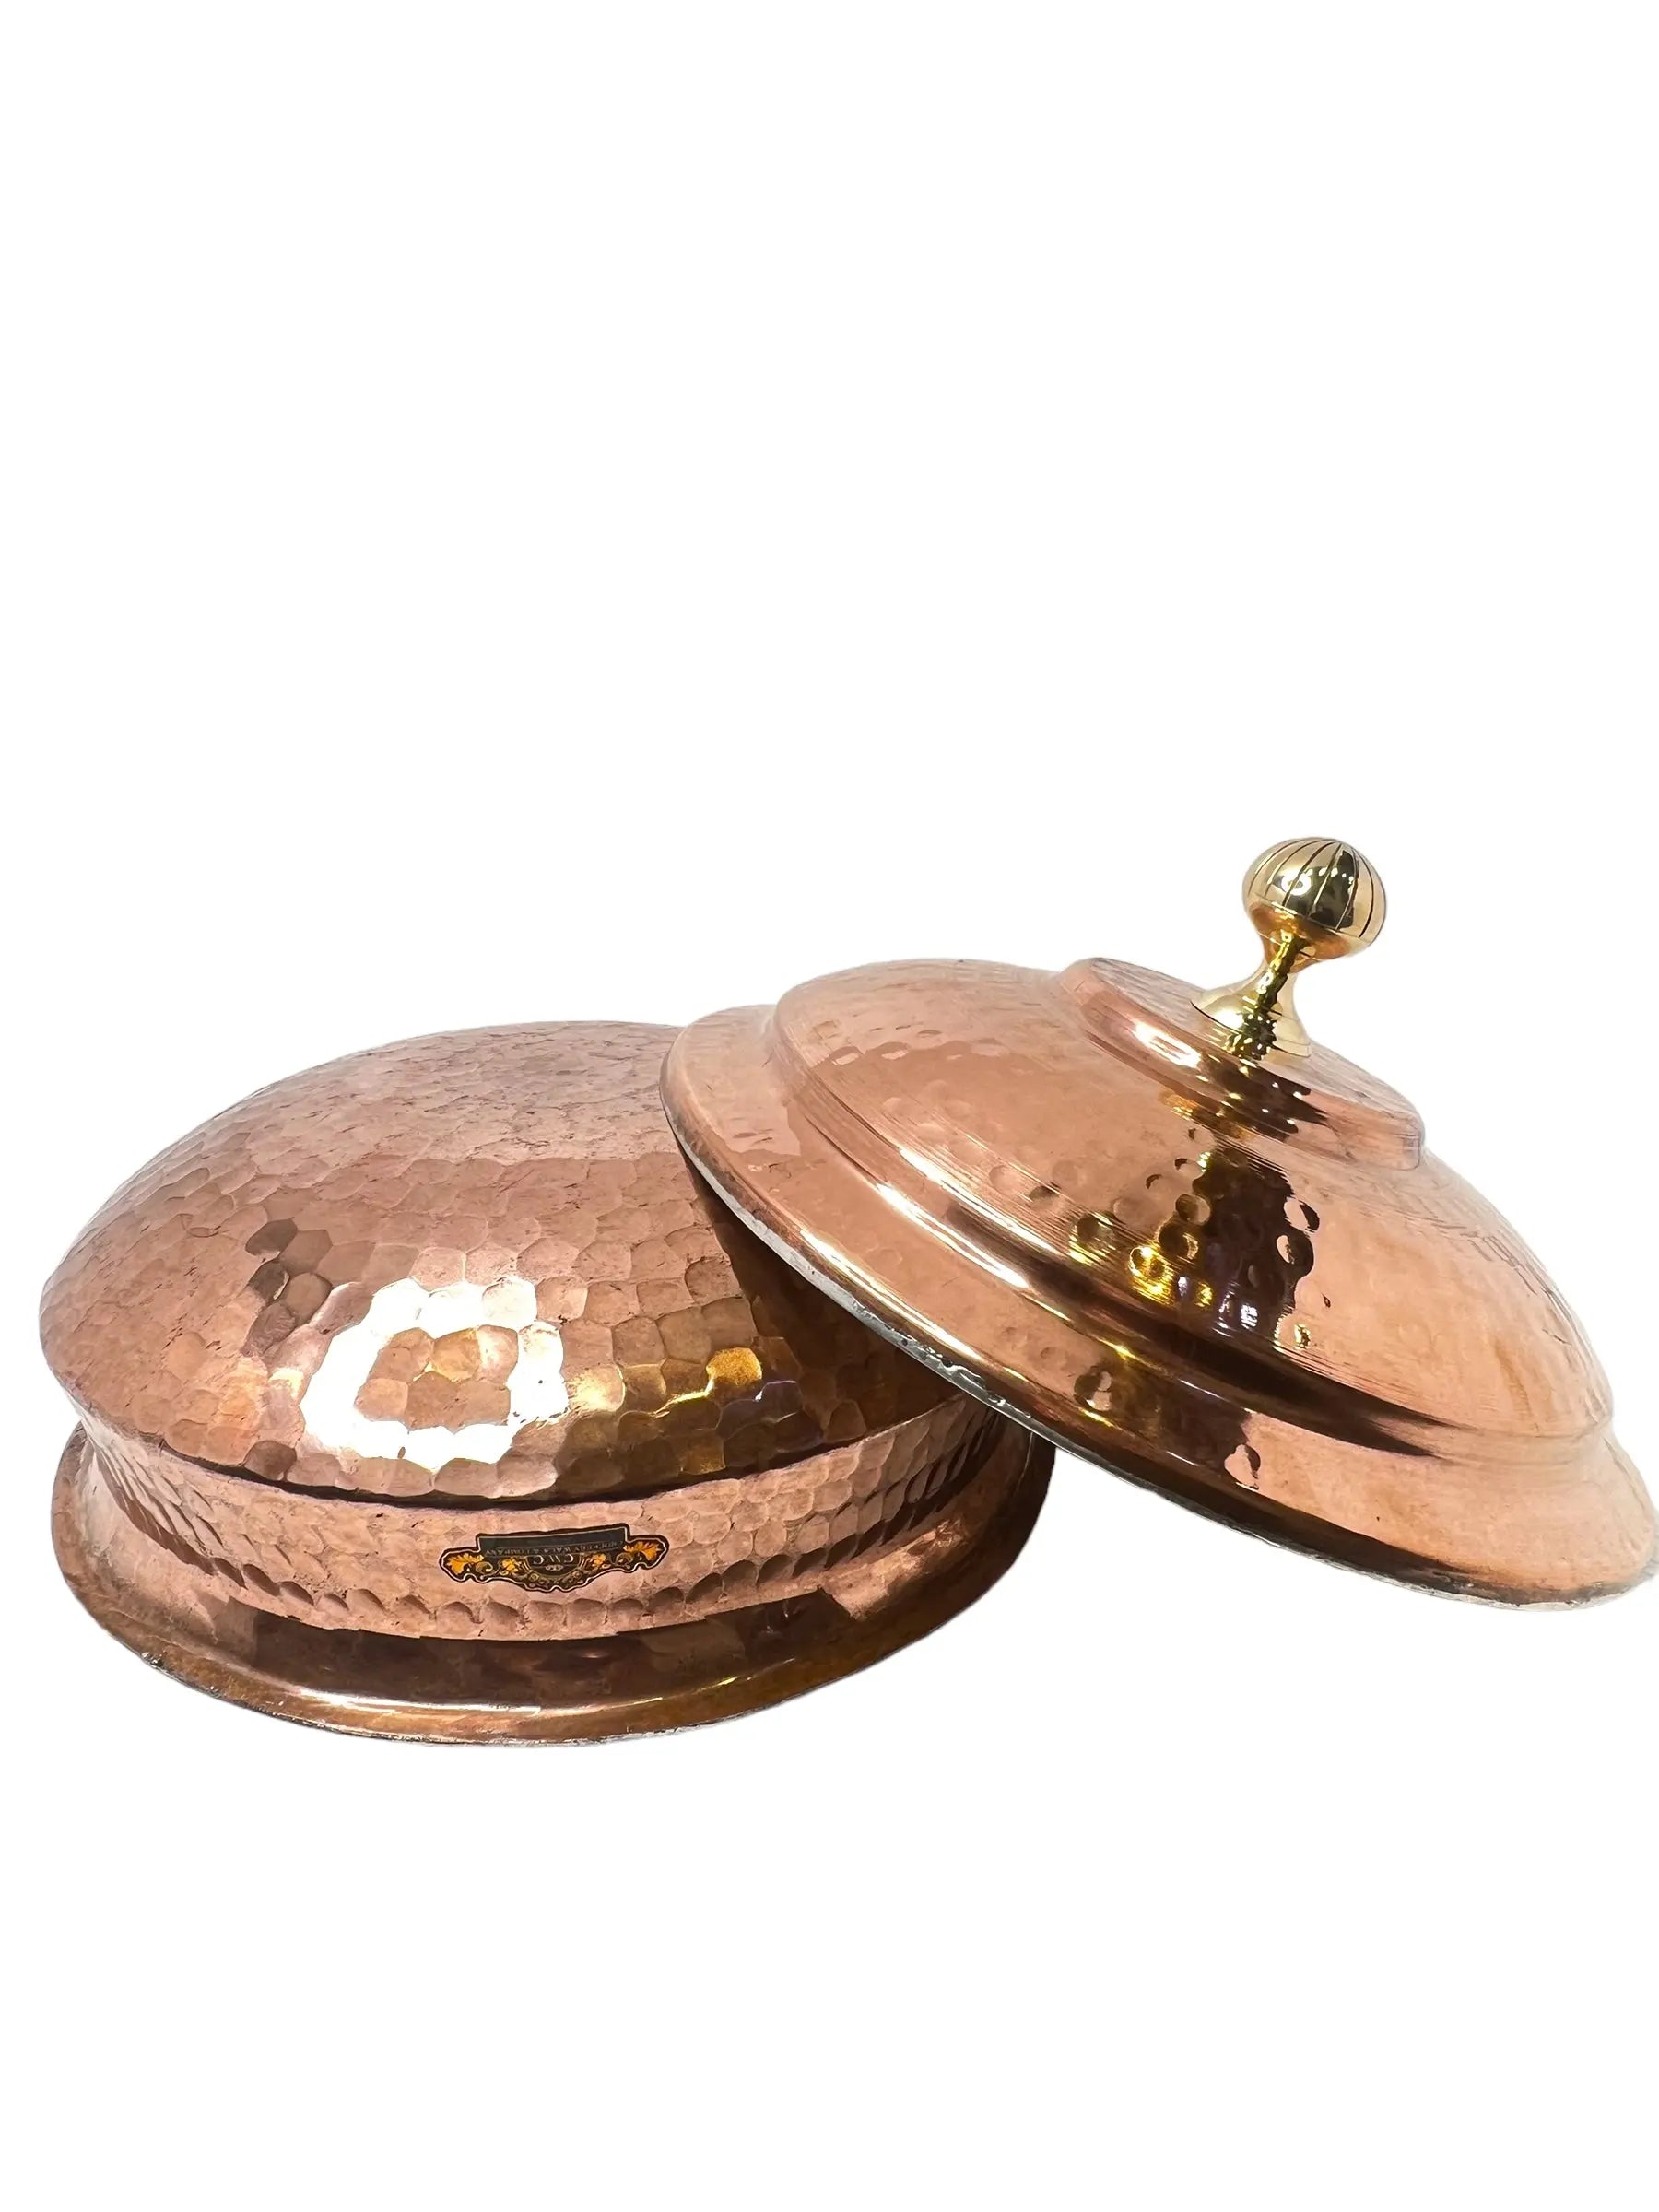 Pure Copper Handi Lagan With Copper Lid For Cooking